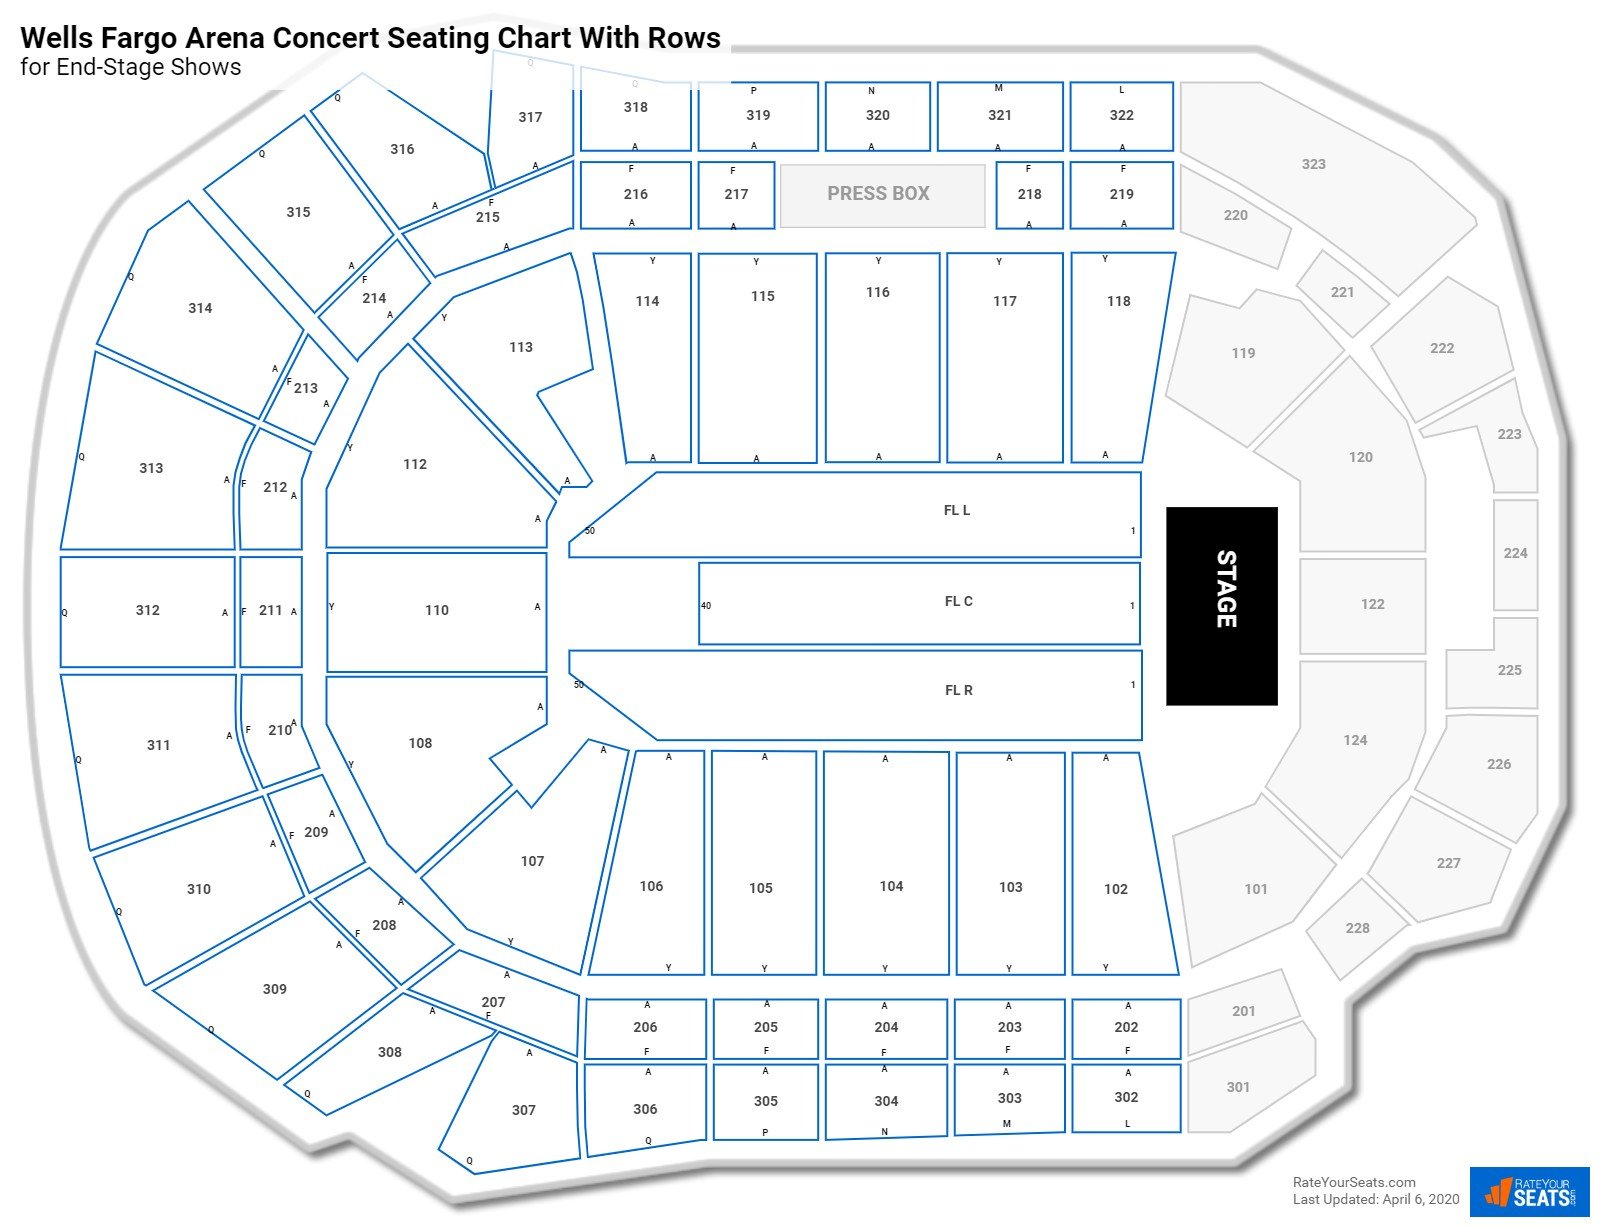 Iowa Events Center seating chart with row numbers